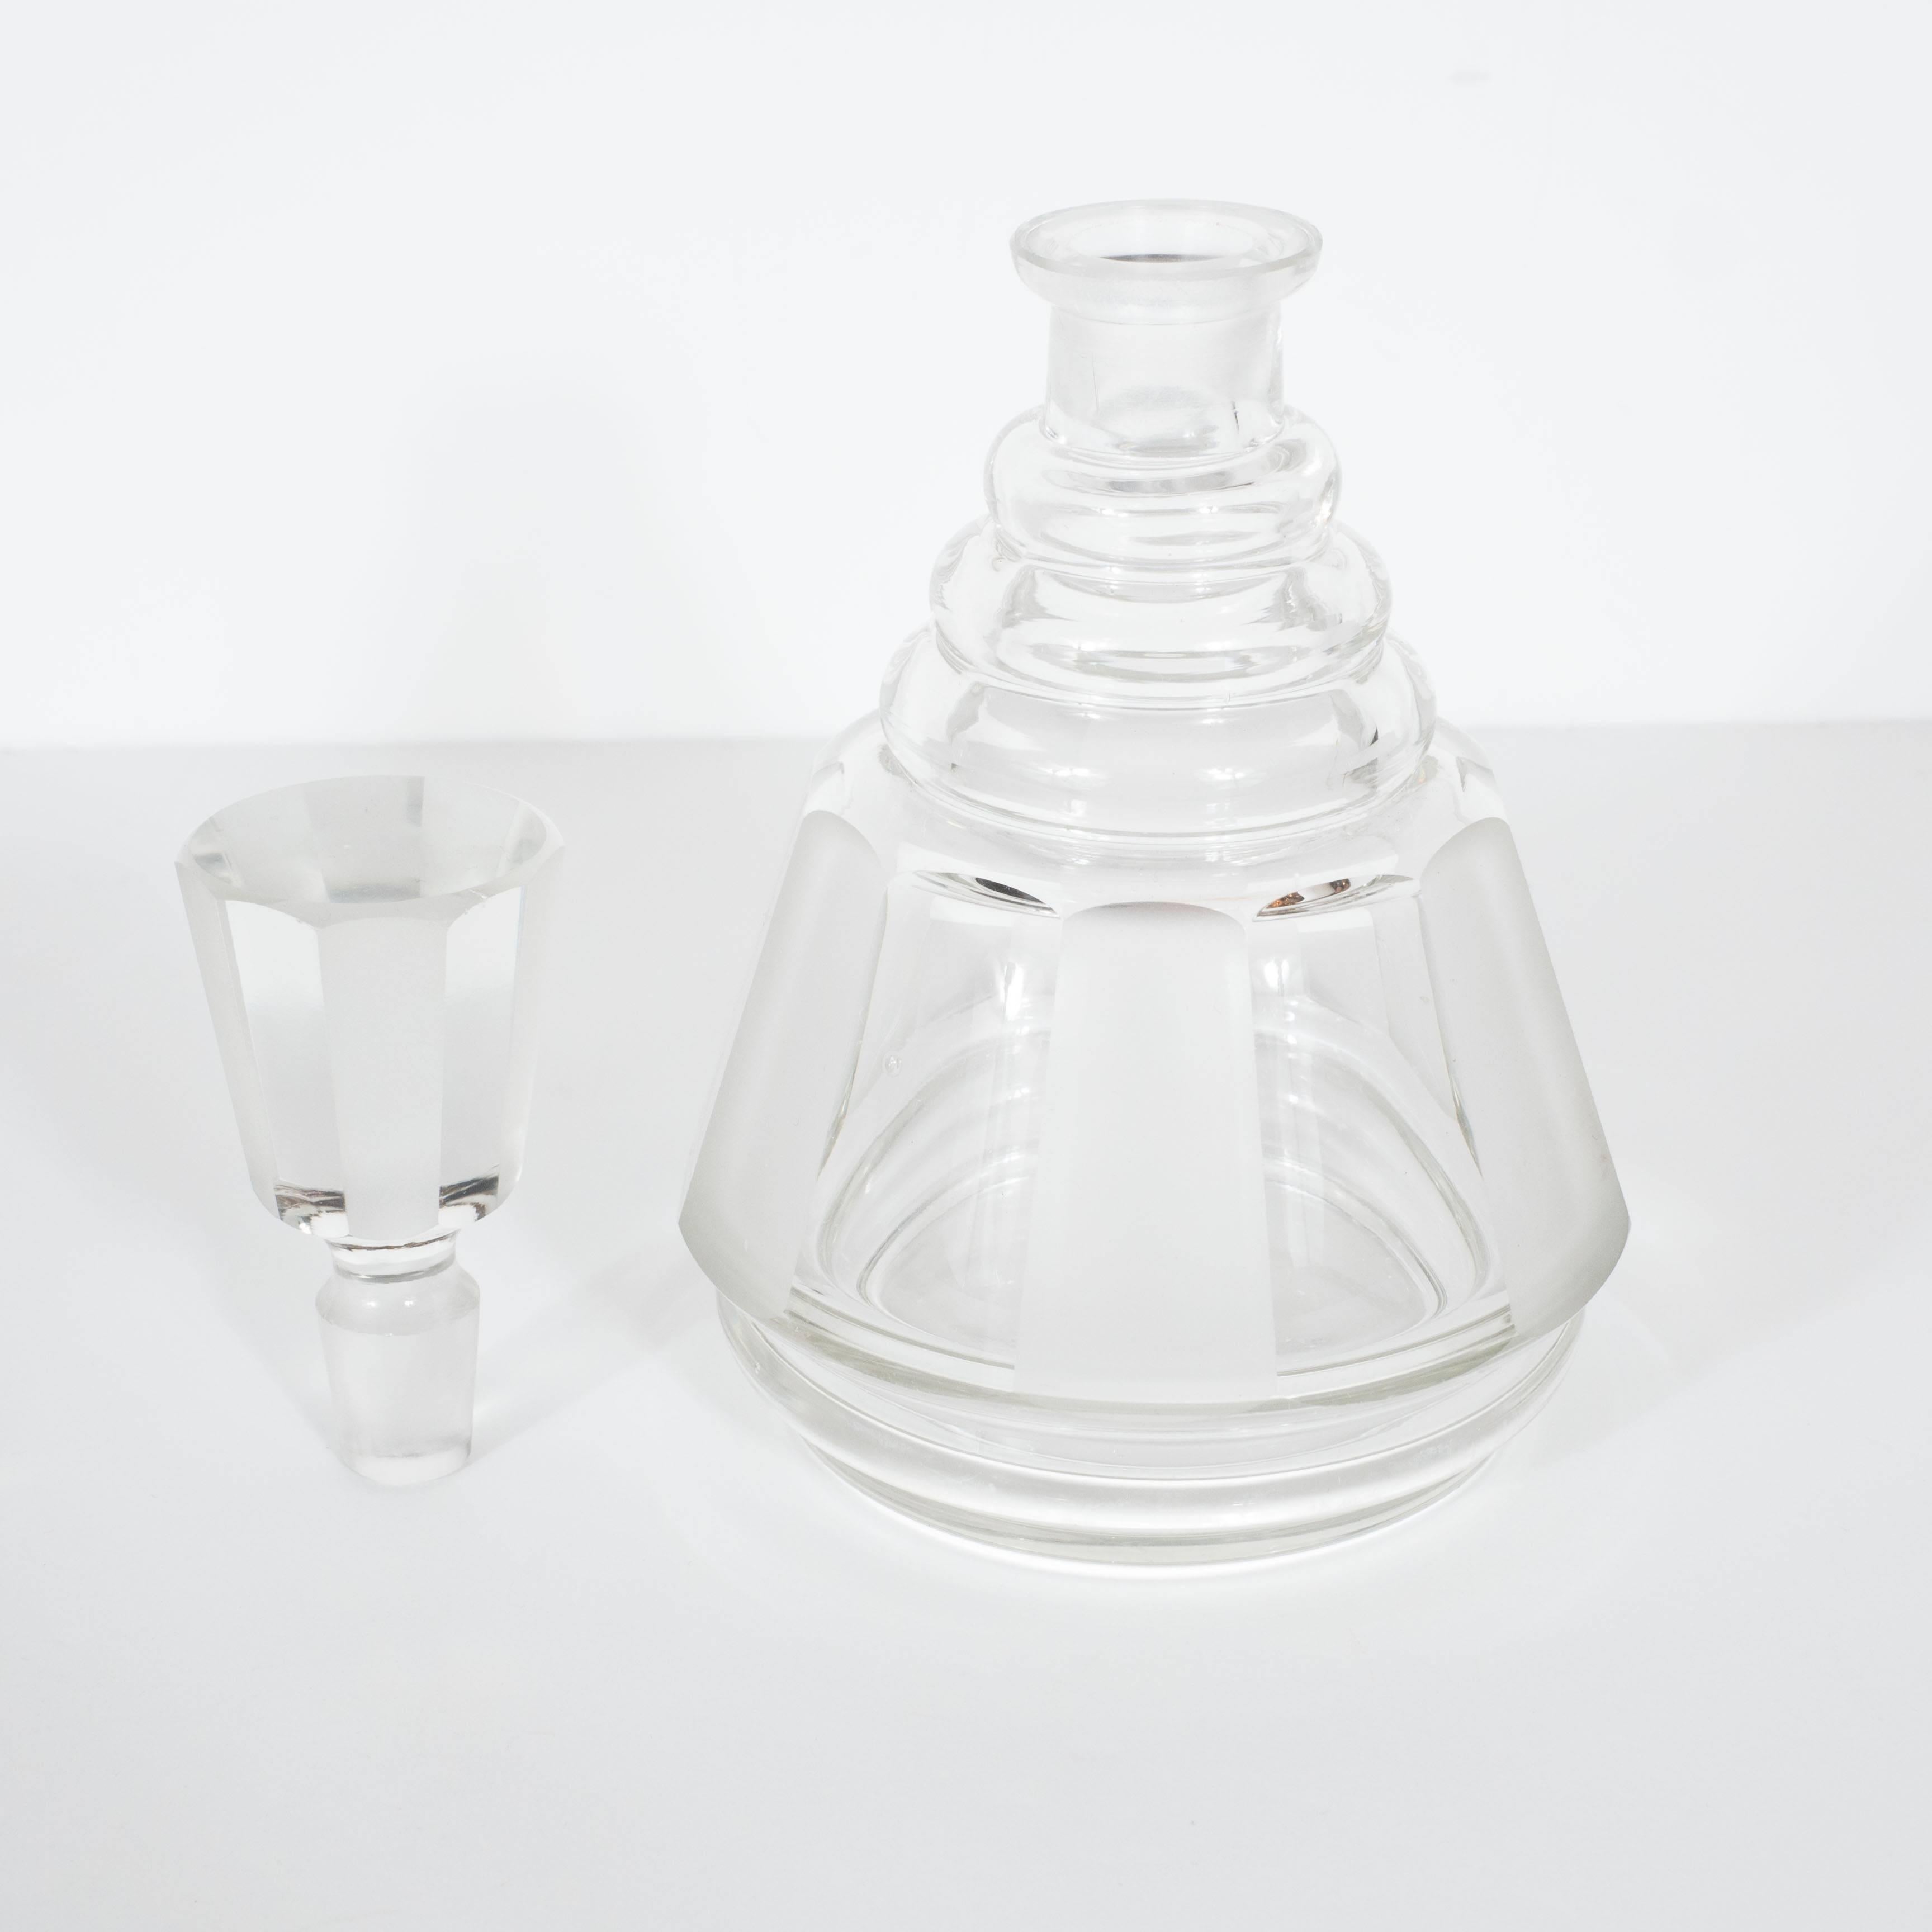 This Cubist style Art Deco glass decanter features frosted accents with a bee hive design that receives the cylindrical stopper. A wonderful addition to a bar or for the Art Deco collector. A great example of the Art Deco movement in